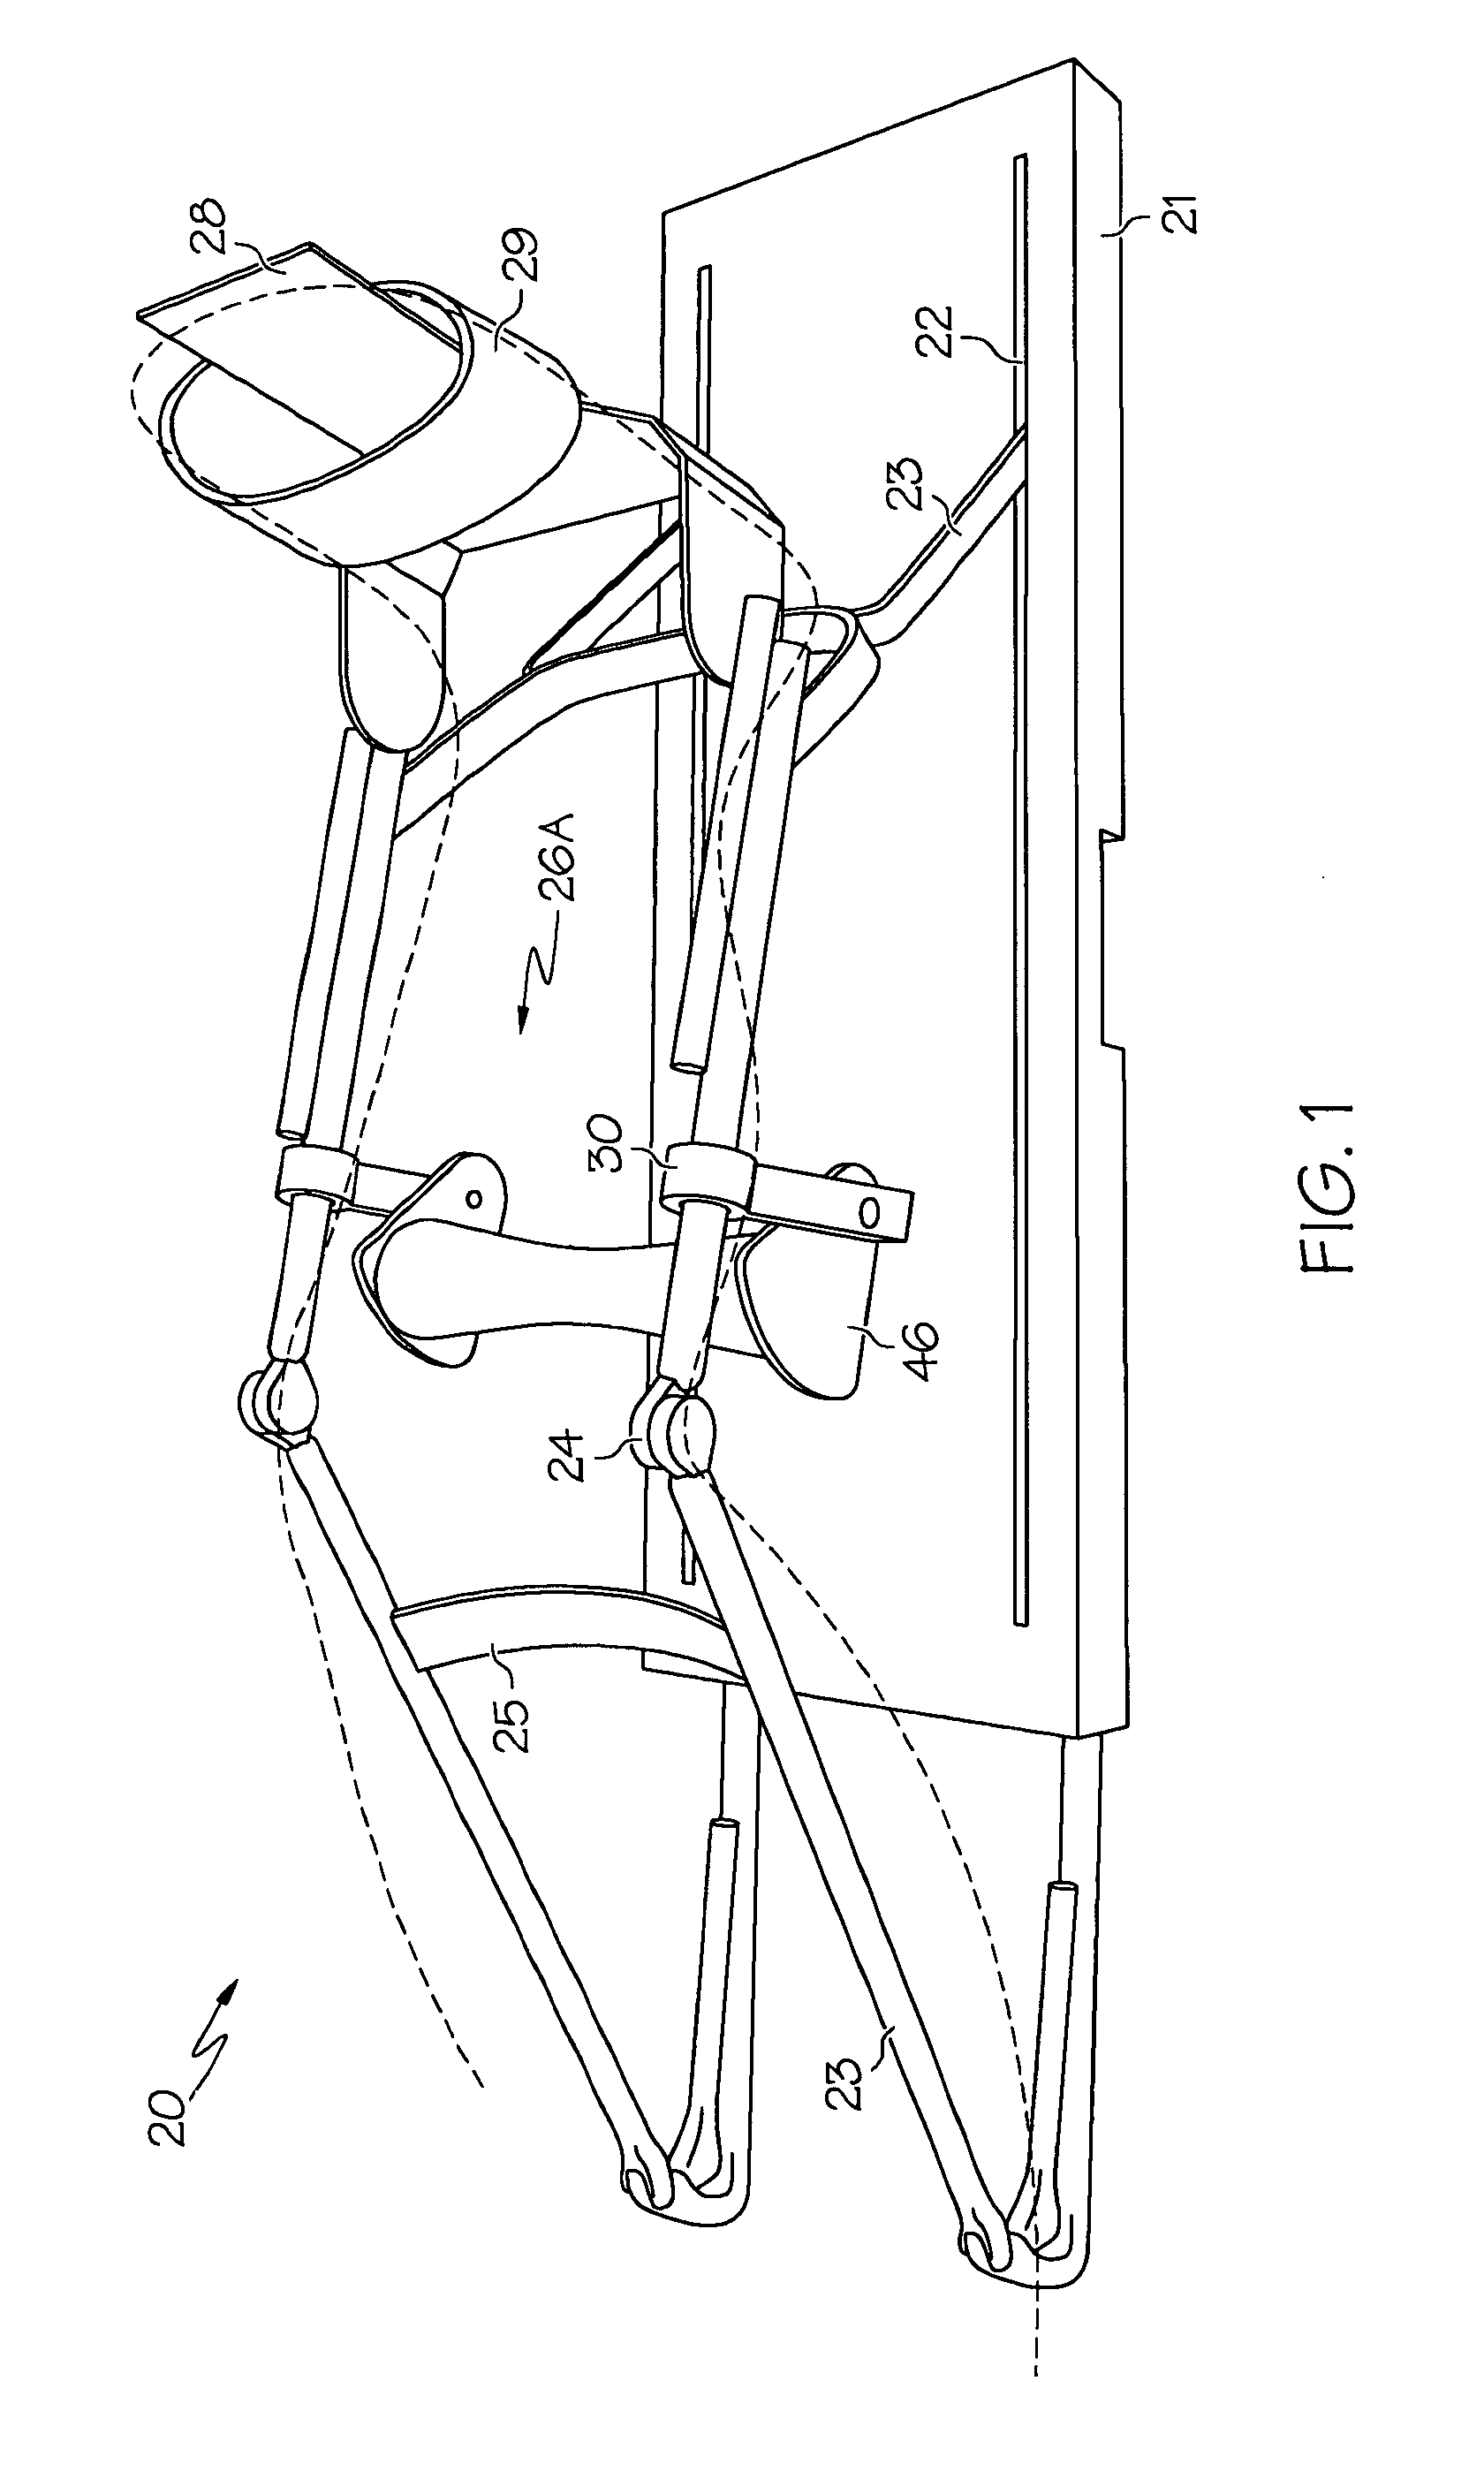 Passive motion machine with integrated mechanical DVT prophylactic therapy